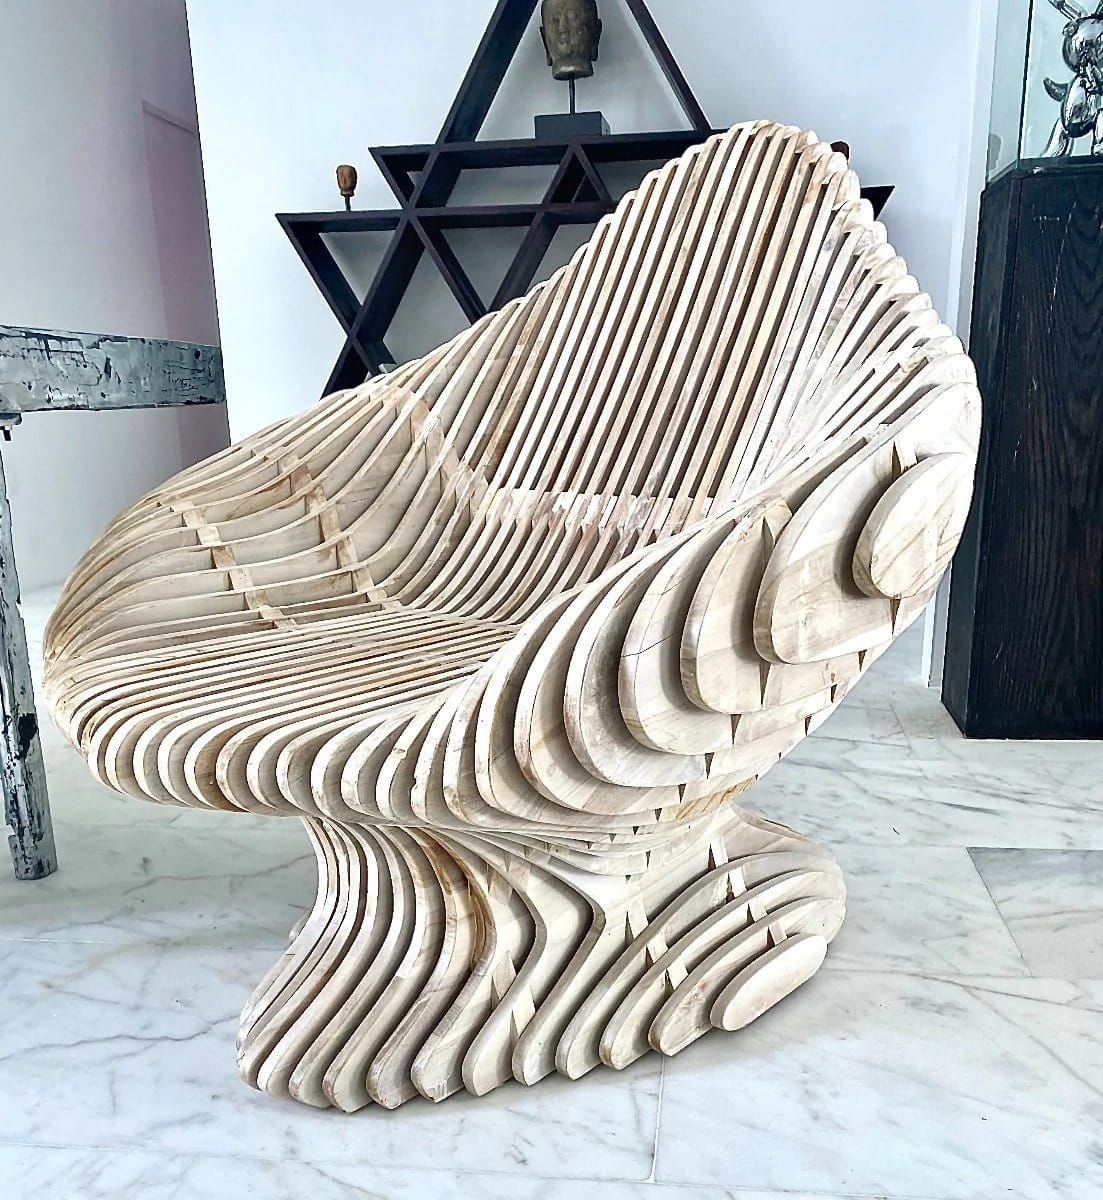 Parametric furniture called brevard chair created with irregularly shaped track pieces